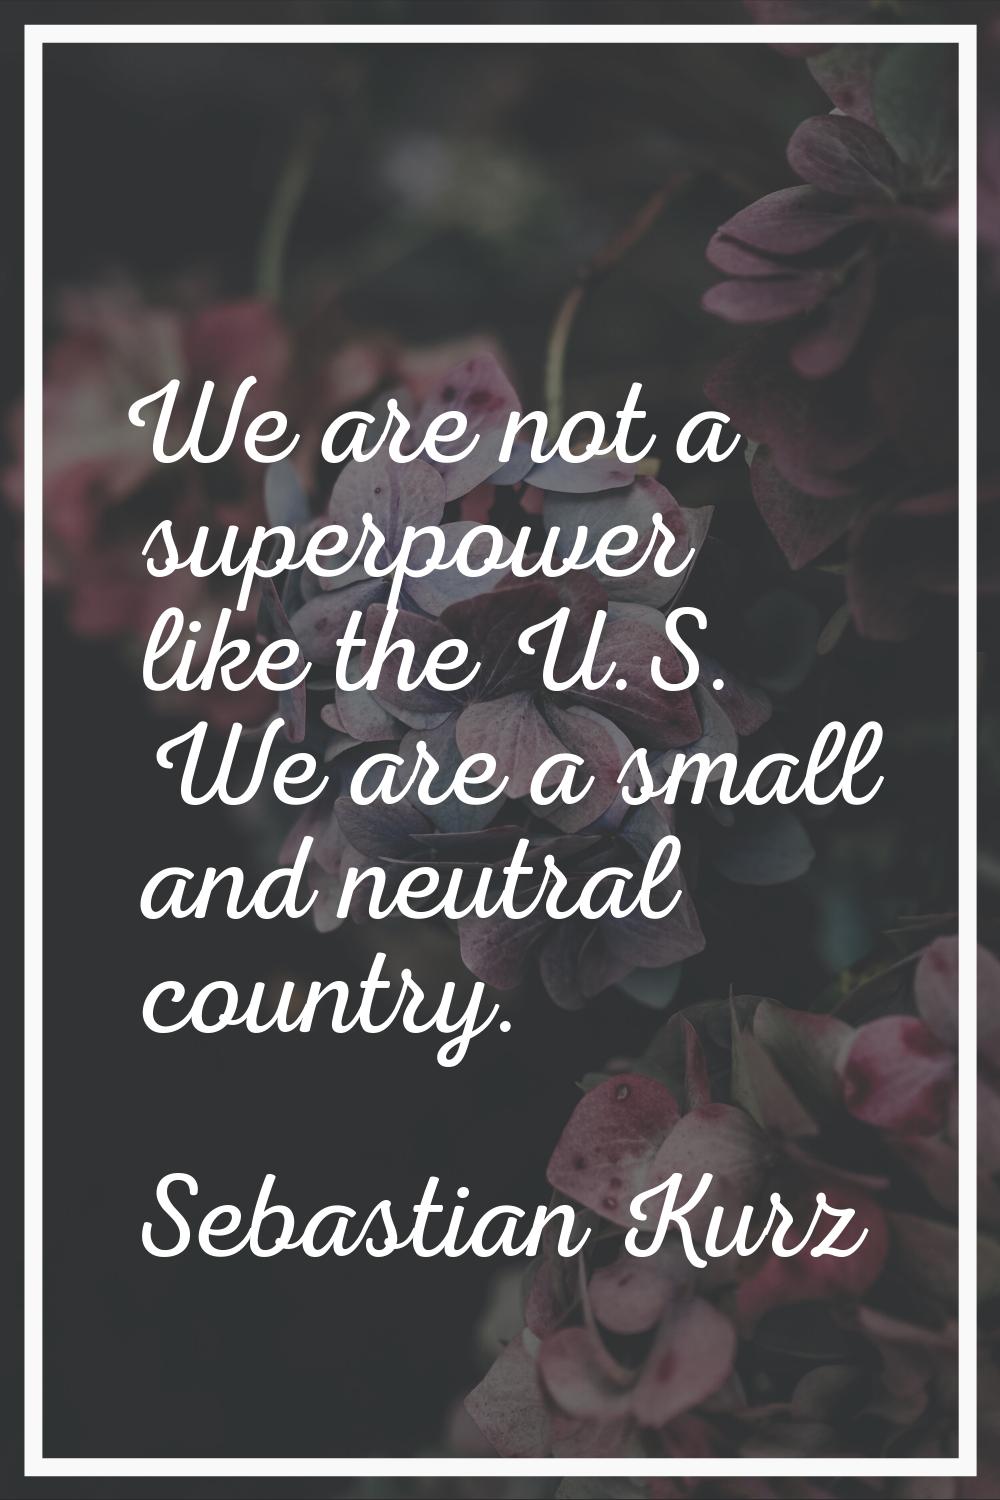 We are not a superpower like the U.S. We are a small and neutral country.